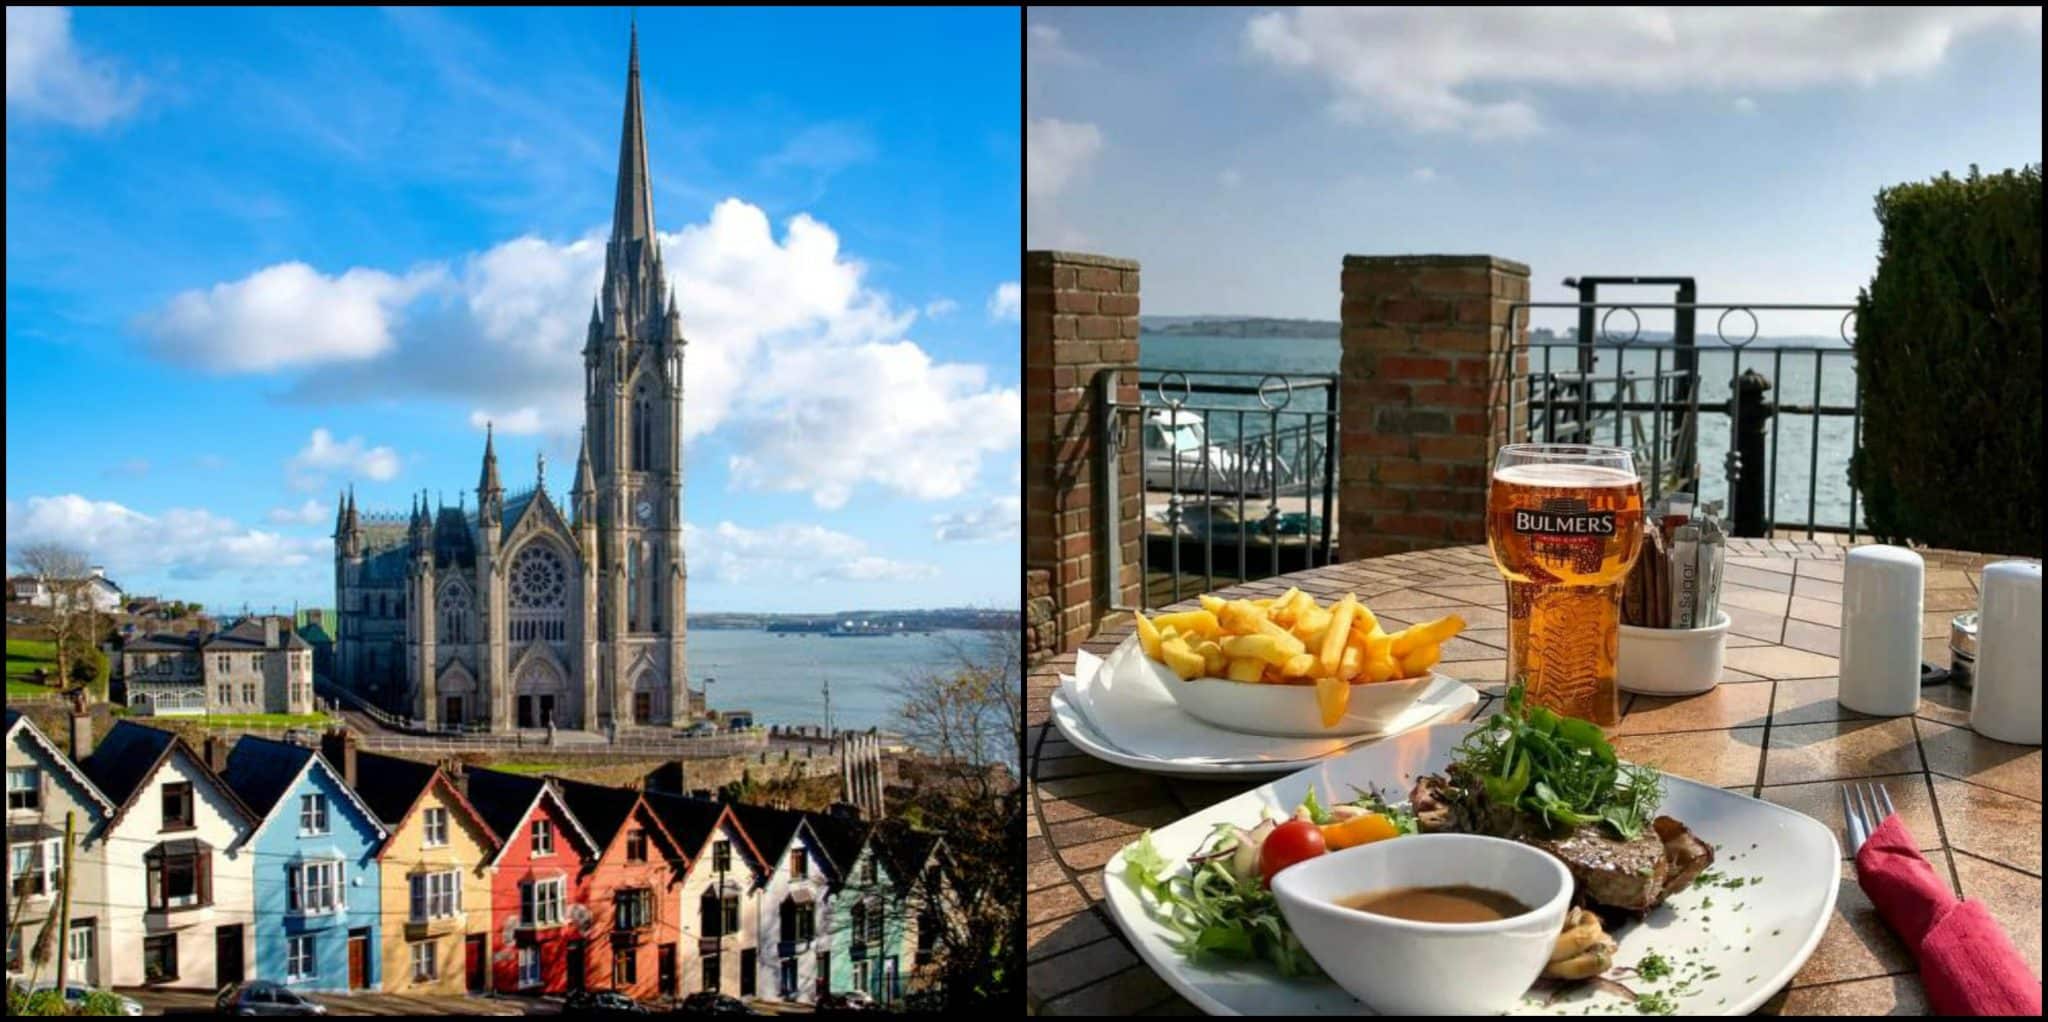 THE 10 BEST Hotels in Cobh of 2020 (from 72) - Tripadvisor